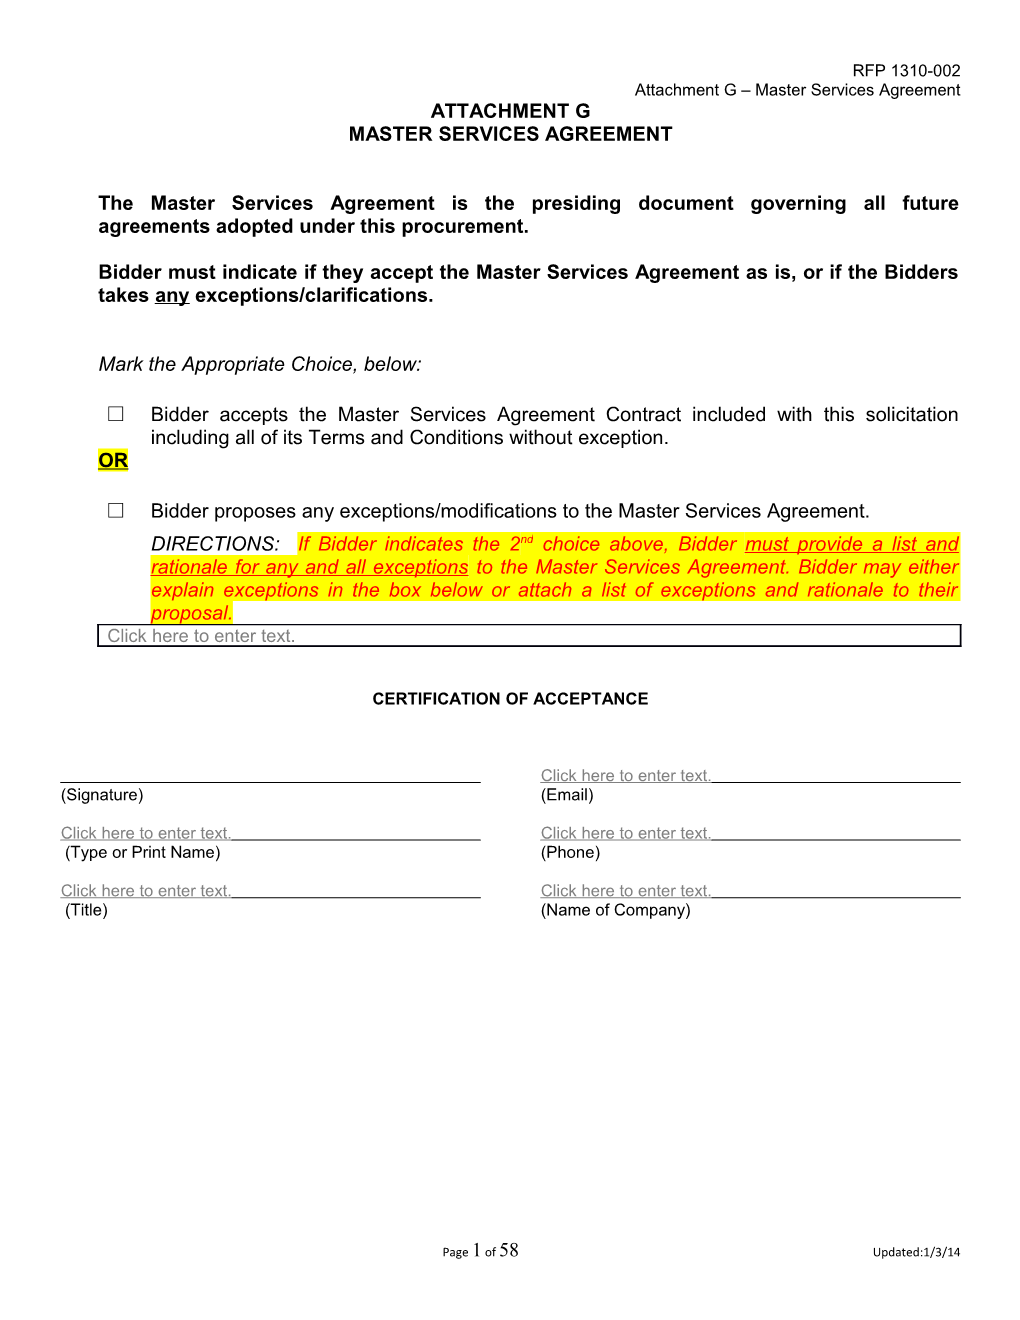 Attachment G - Master Services Agreement